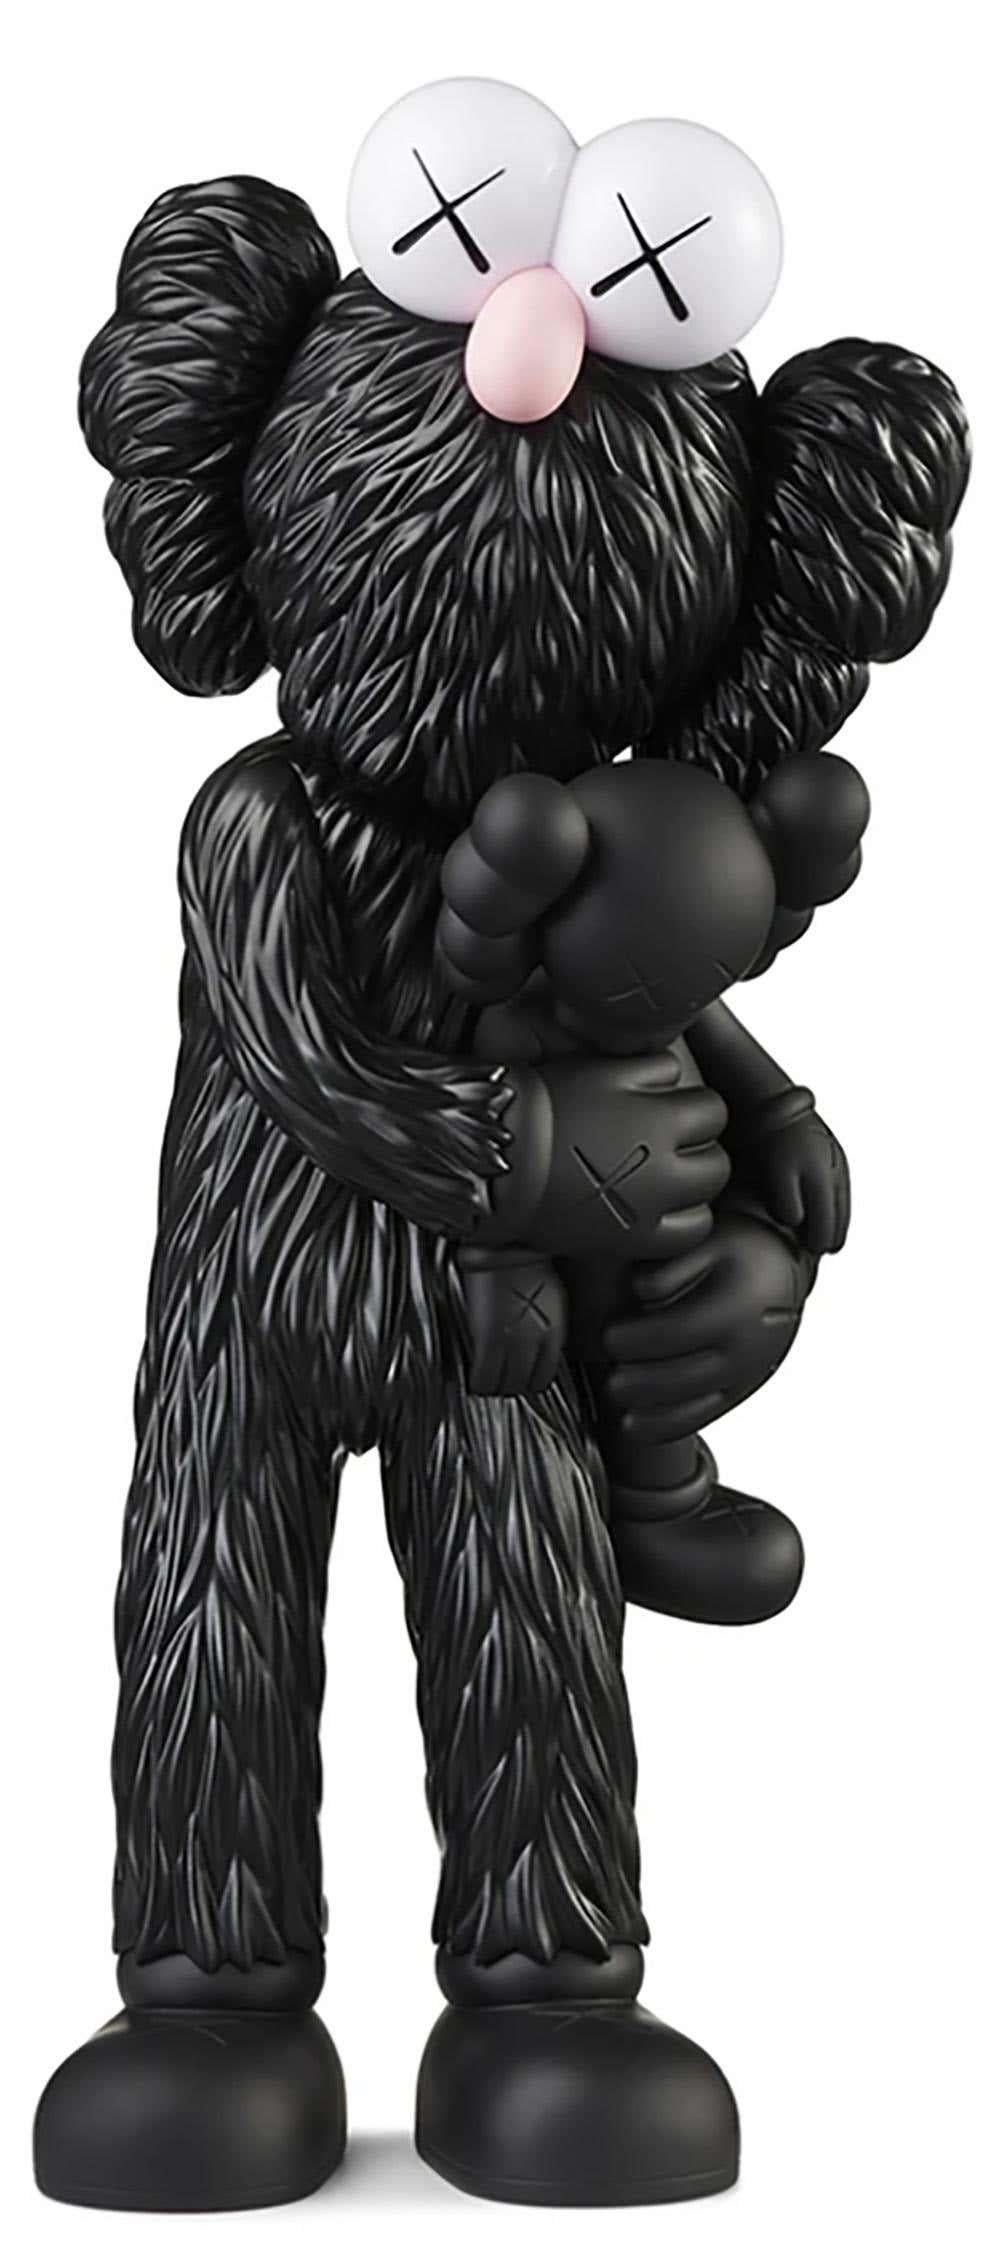 KAWS TAKE (Black) new & unopened in its original packaging. 
A standout KAWS figurative sculpture and variation of KAWS' large scale TAKE sculpture - a key highlight of the exhibition, 'KAWS BLACKOUT’ at Skarstedt Gallery London in 2019 - the first